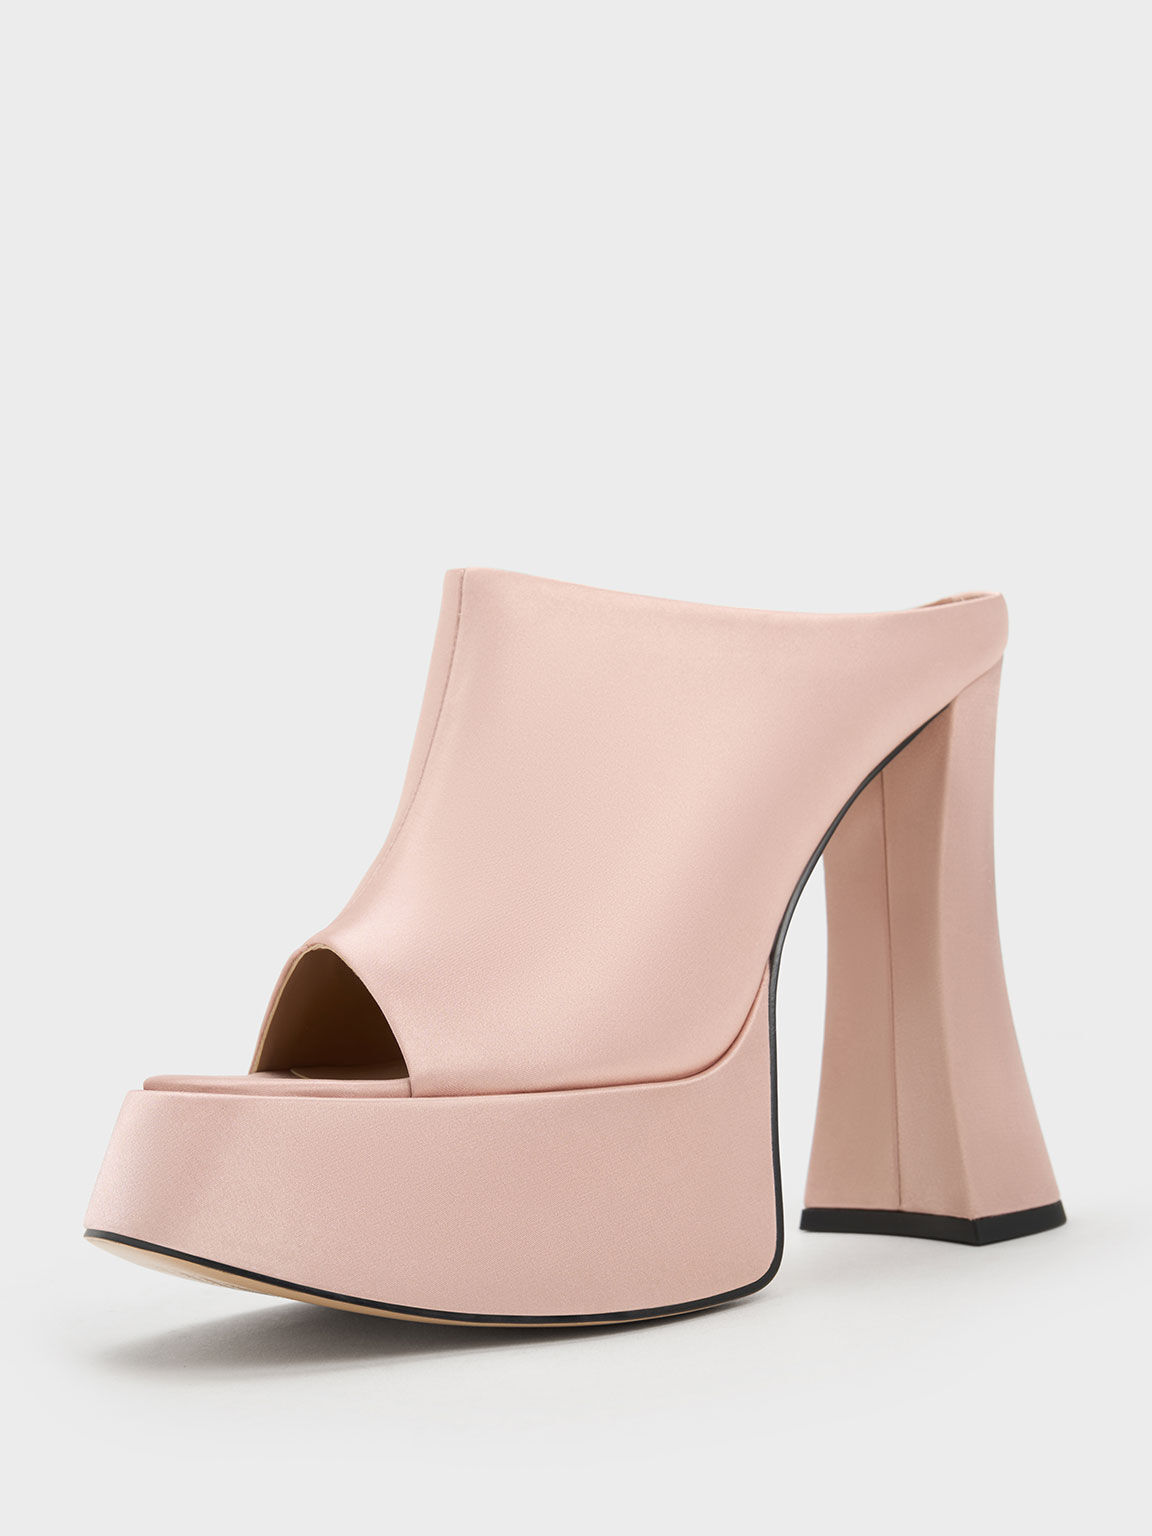 Delphine Recycled Polyester Platform Mules - Nude